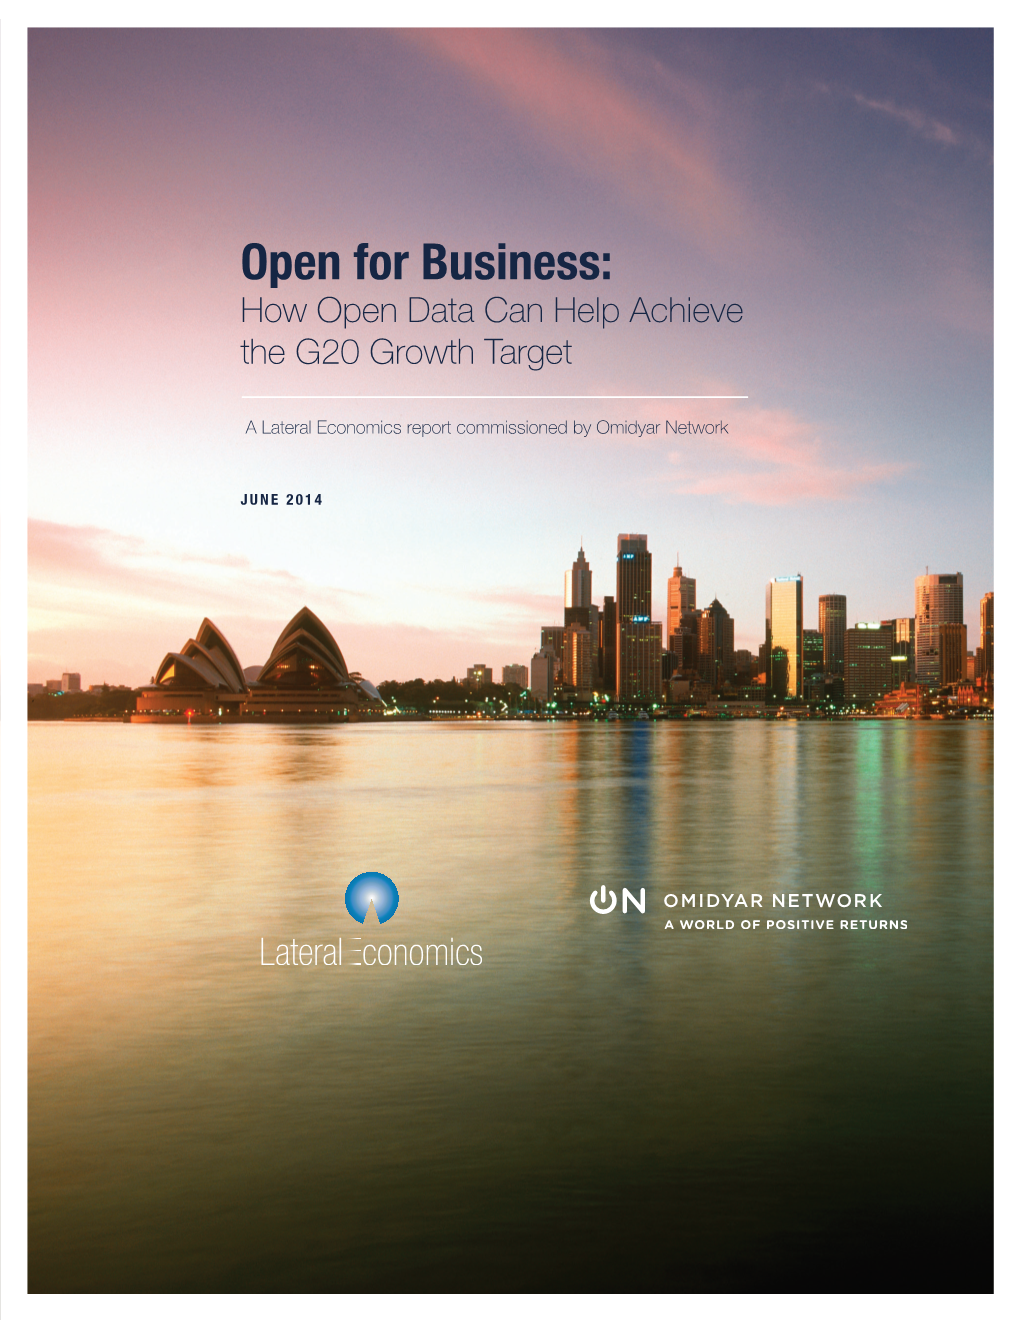 Open for Business: How Open Data Can Help Achieve the G20 Growth Target